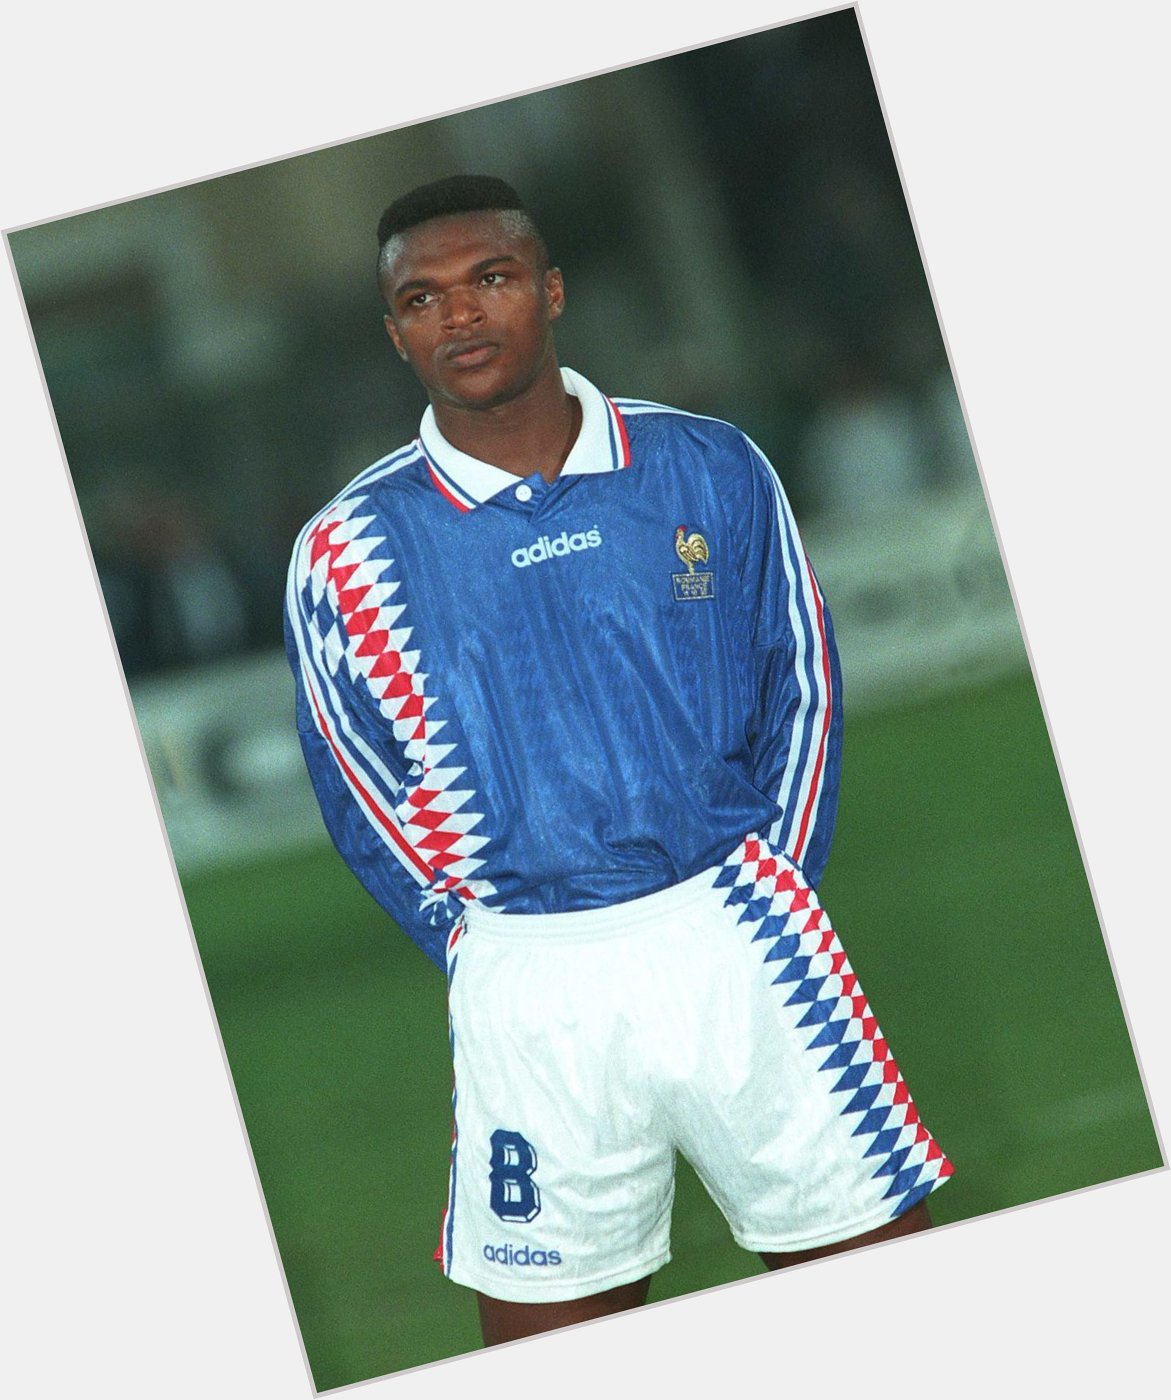 Happy Birthday, Marcel Desailly.

This guy wore some serious football shirts. 